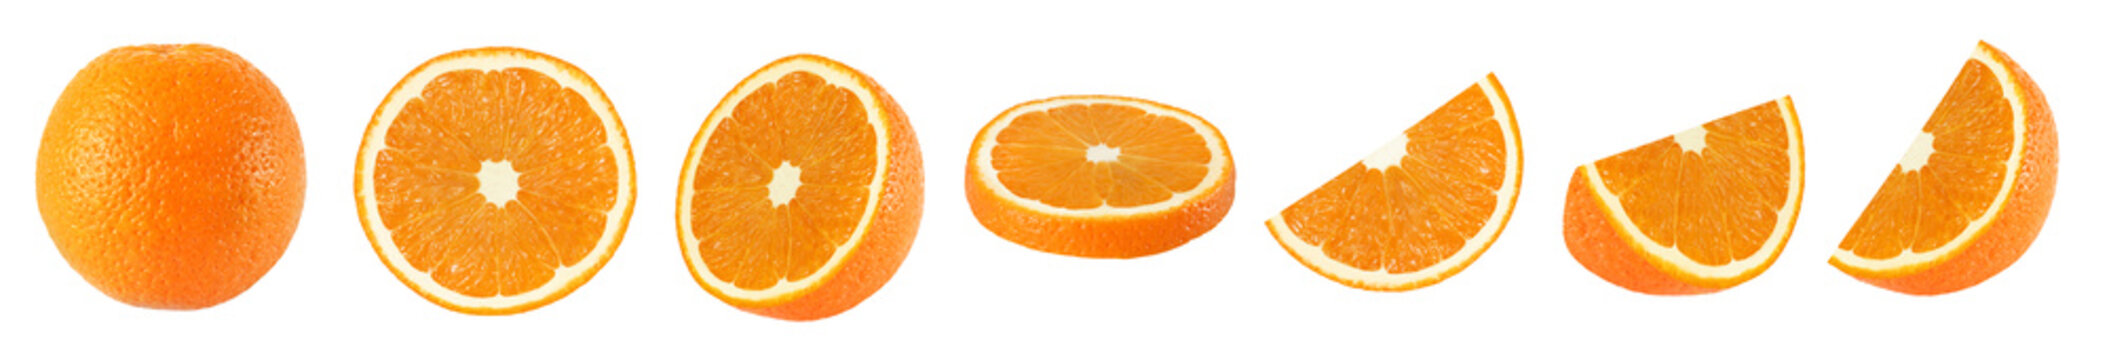 Collection of whole and sliced orange fruits on white background isolated with clipping path